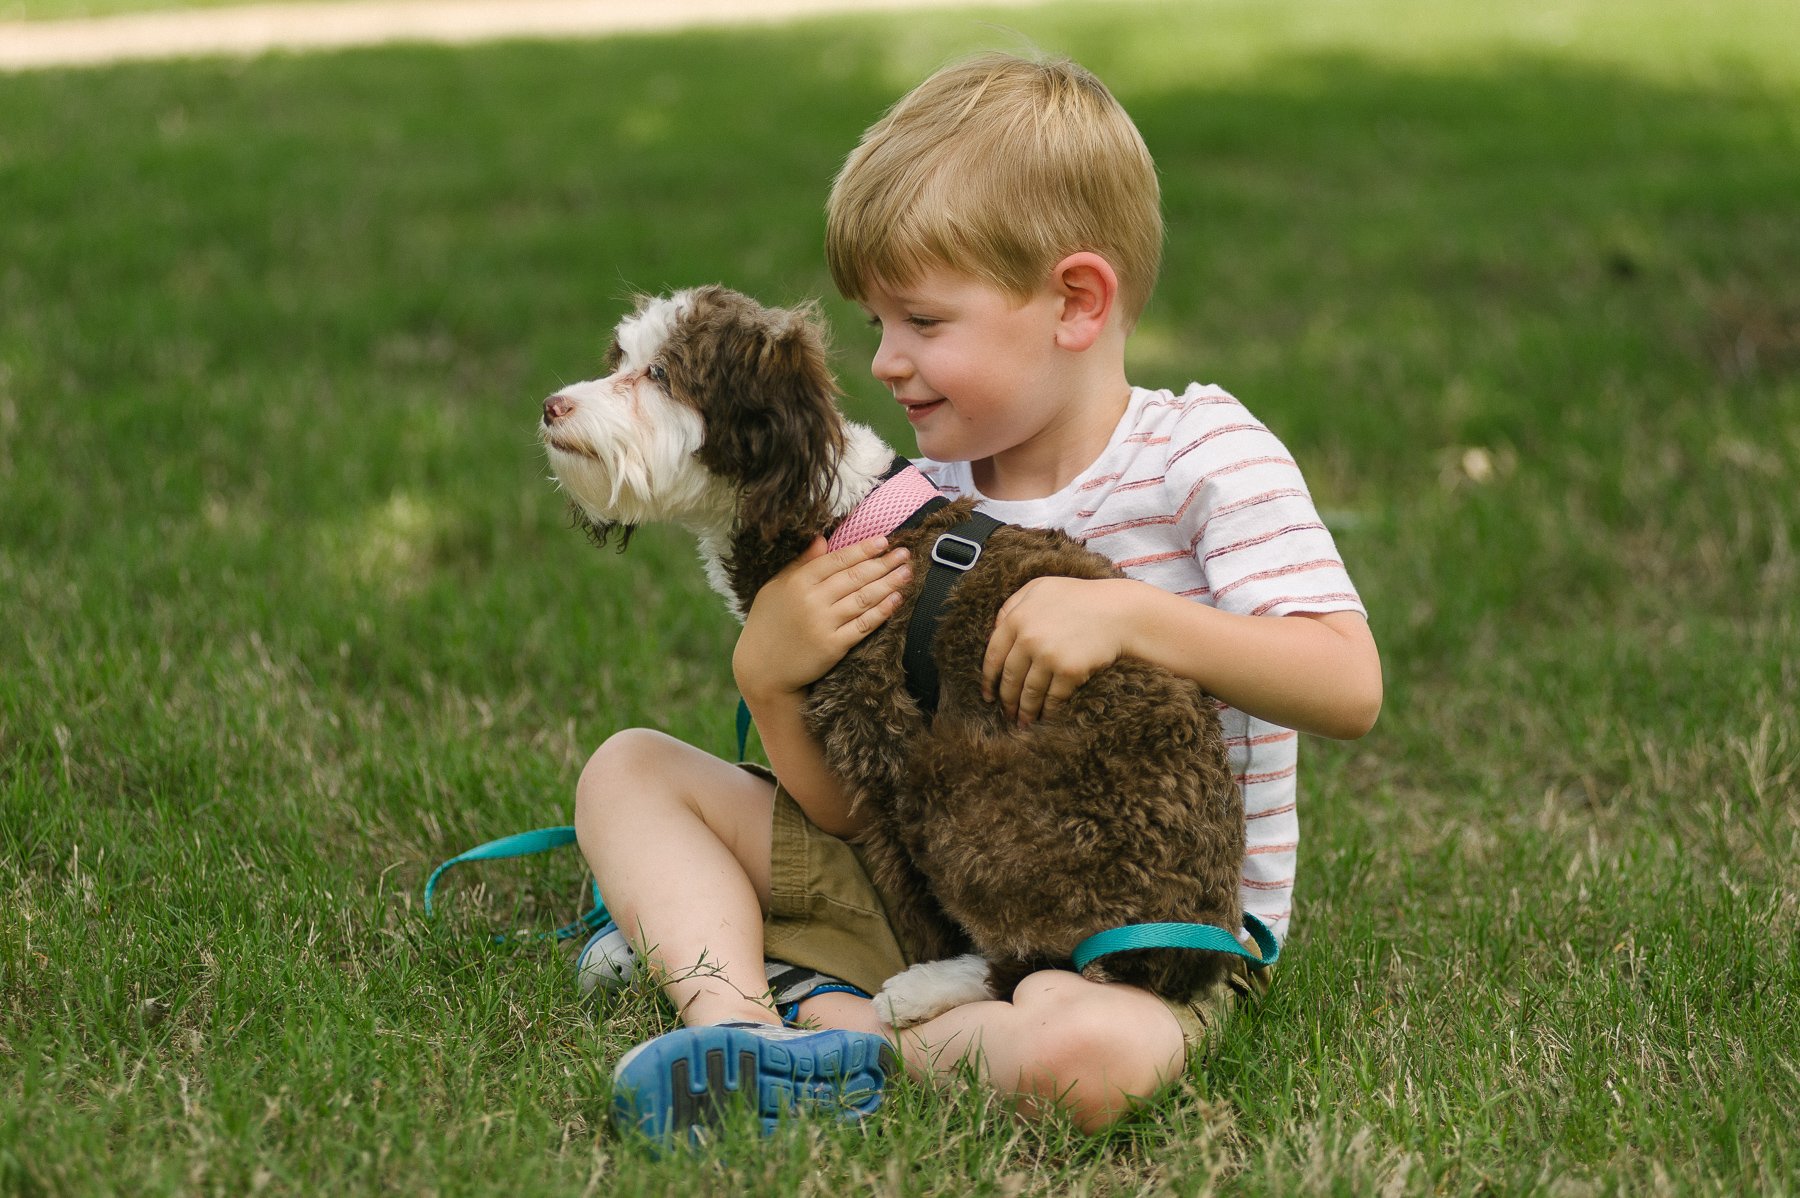 A young kid playing with his dog on his lawn